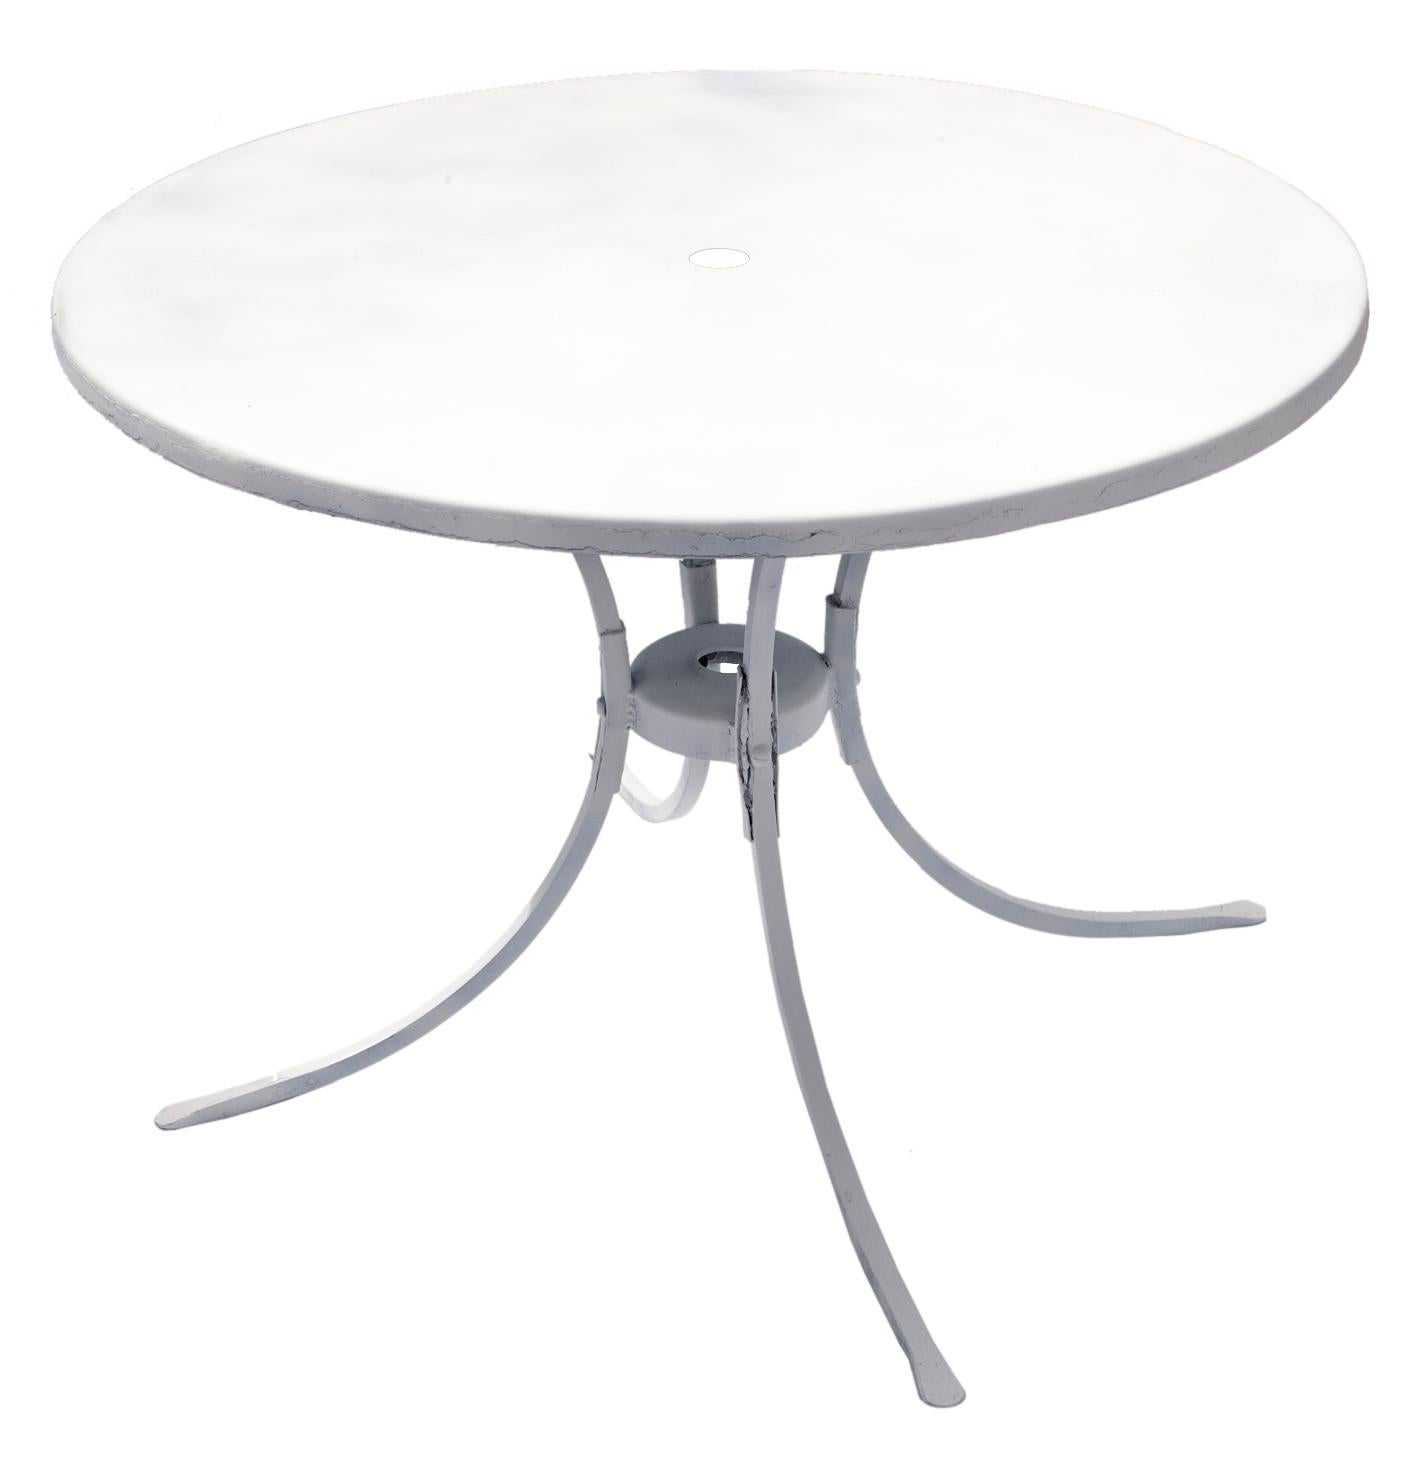 Round patio table with umbrella hole/holder.
New paint in clear clean white satin finish.